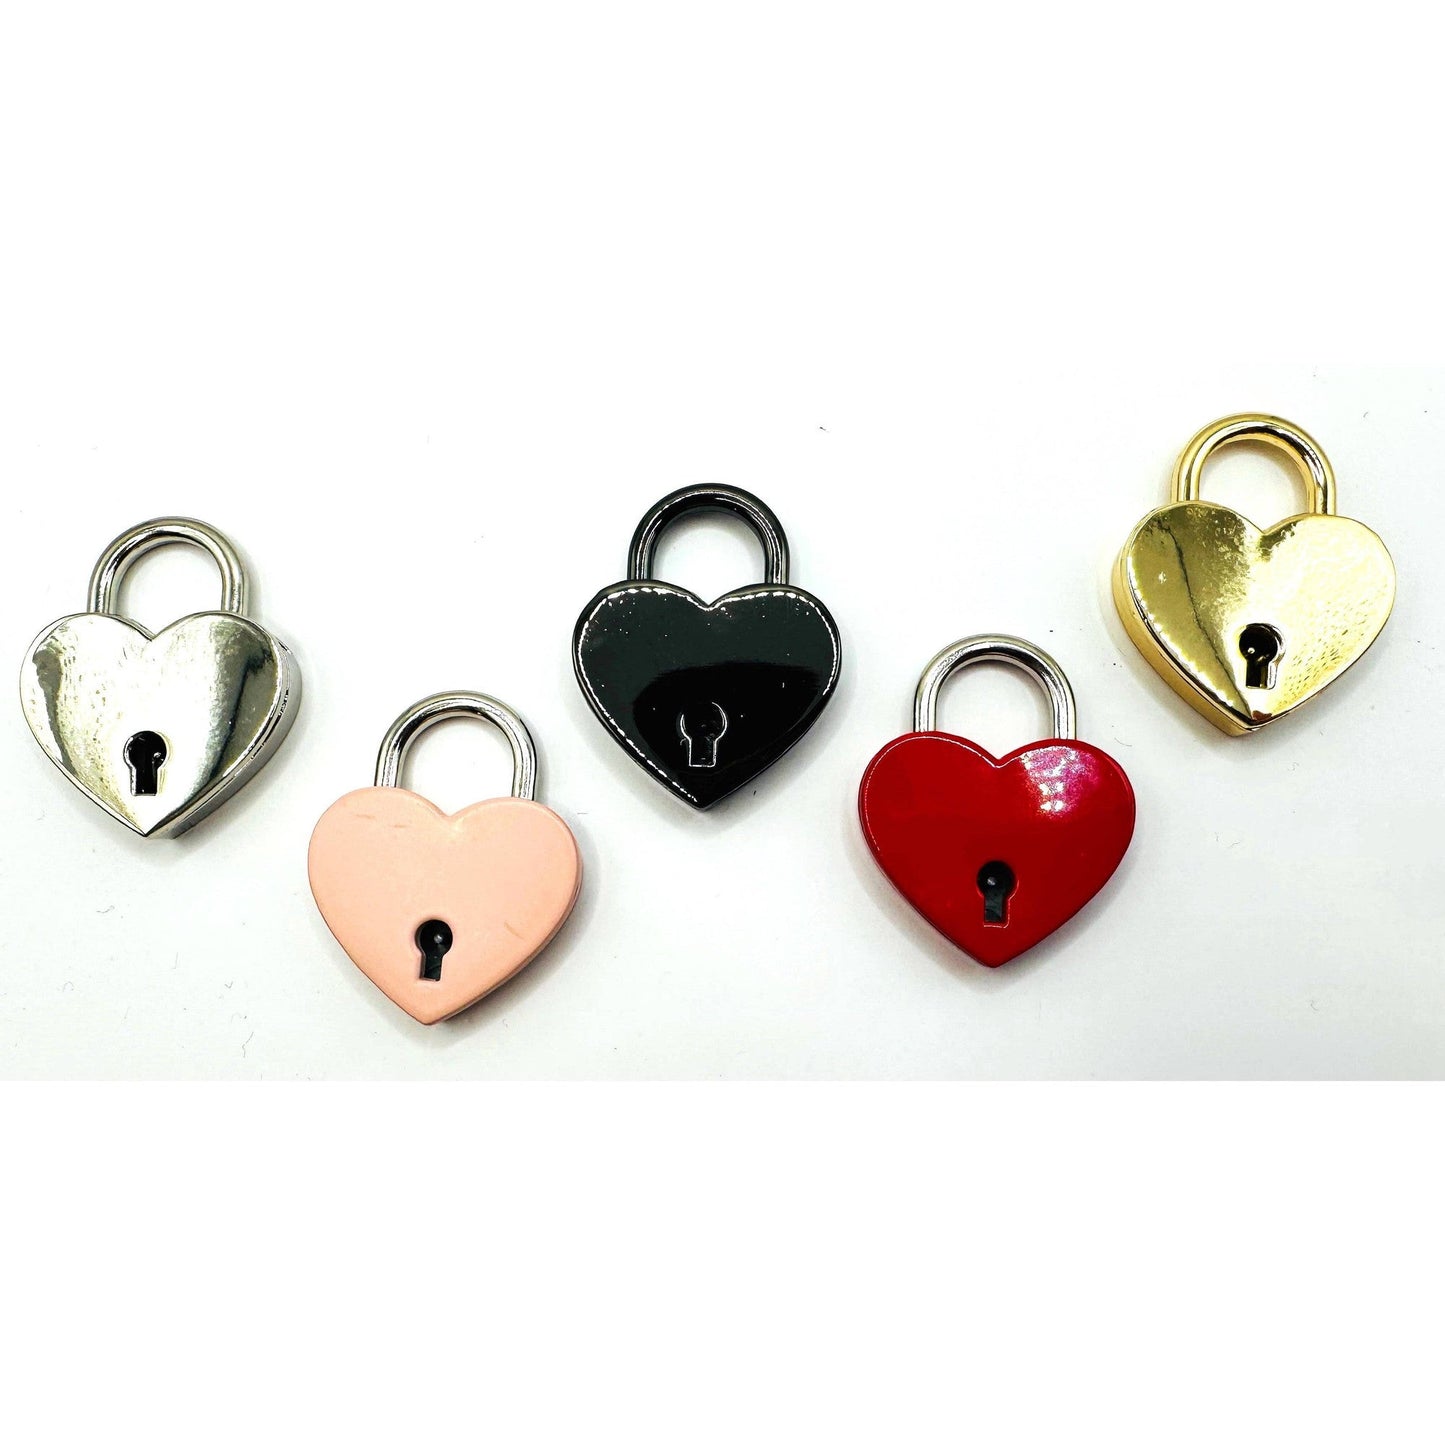 Mini Heart Lock with Key [5 Color Options]